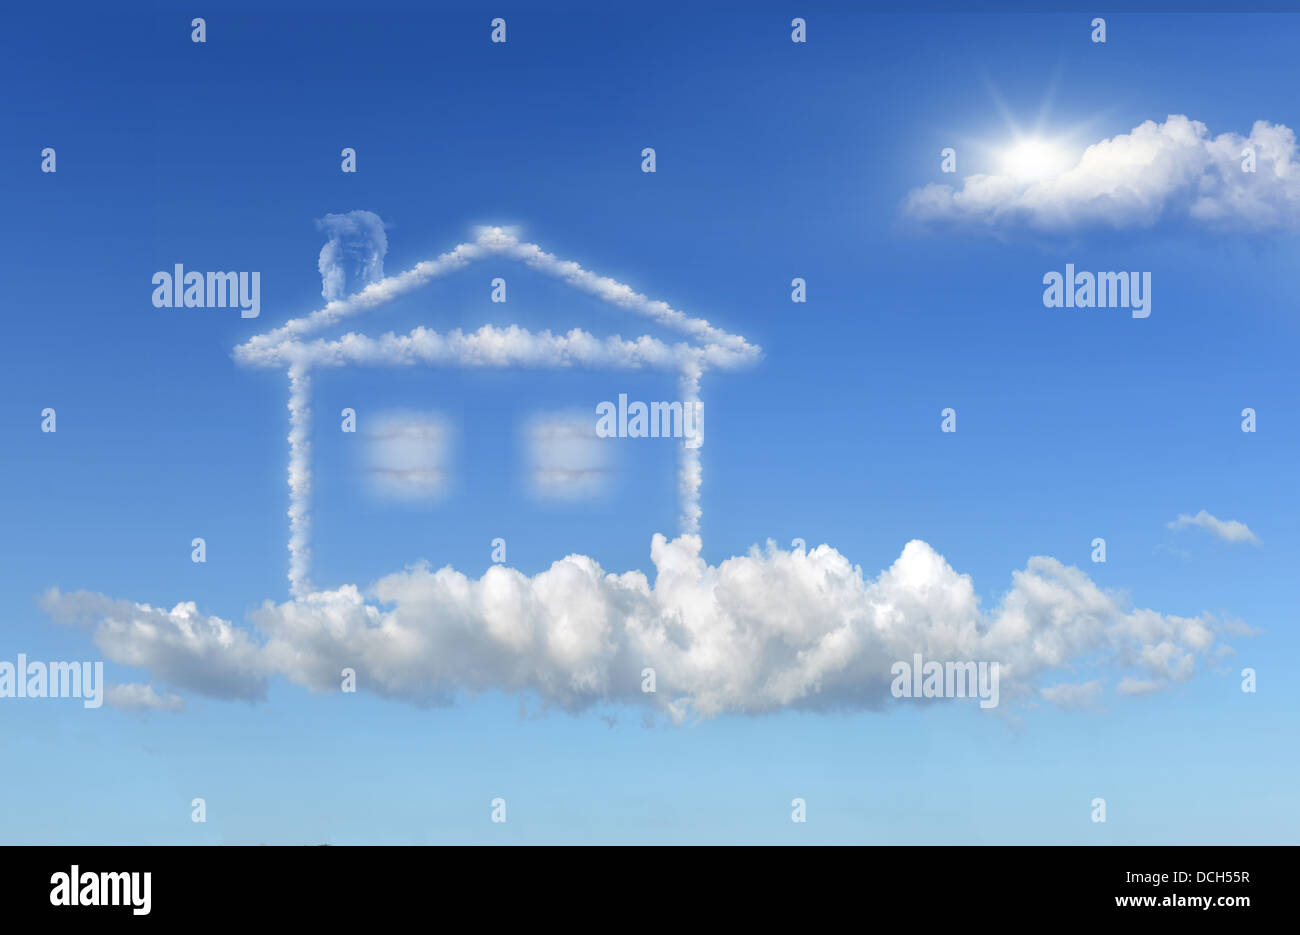 House of clouds in the dreams of a blue sky background. Stock Photo